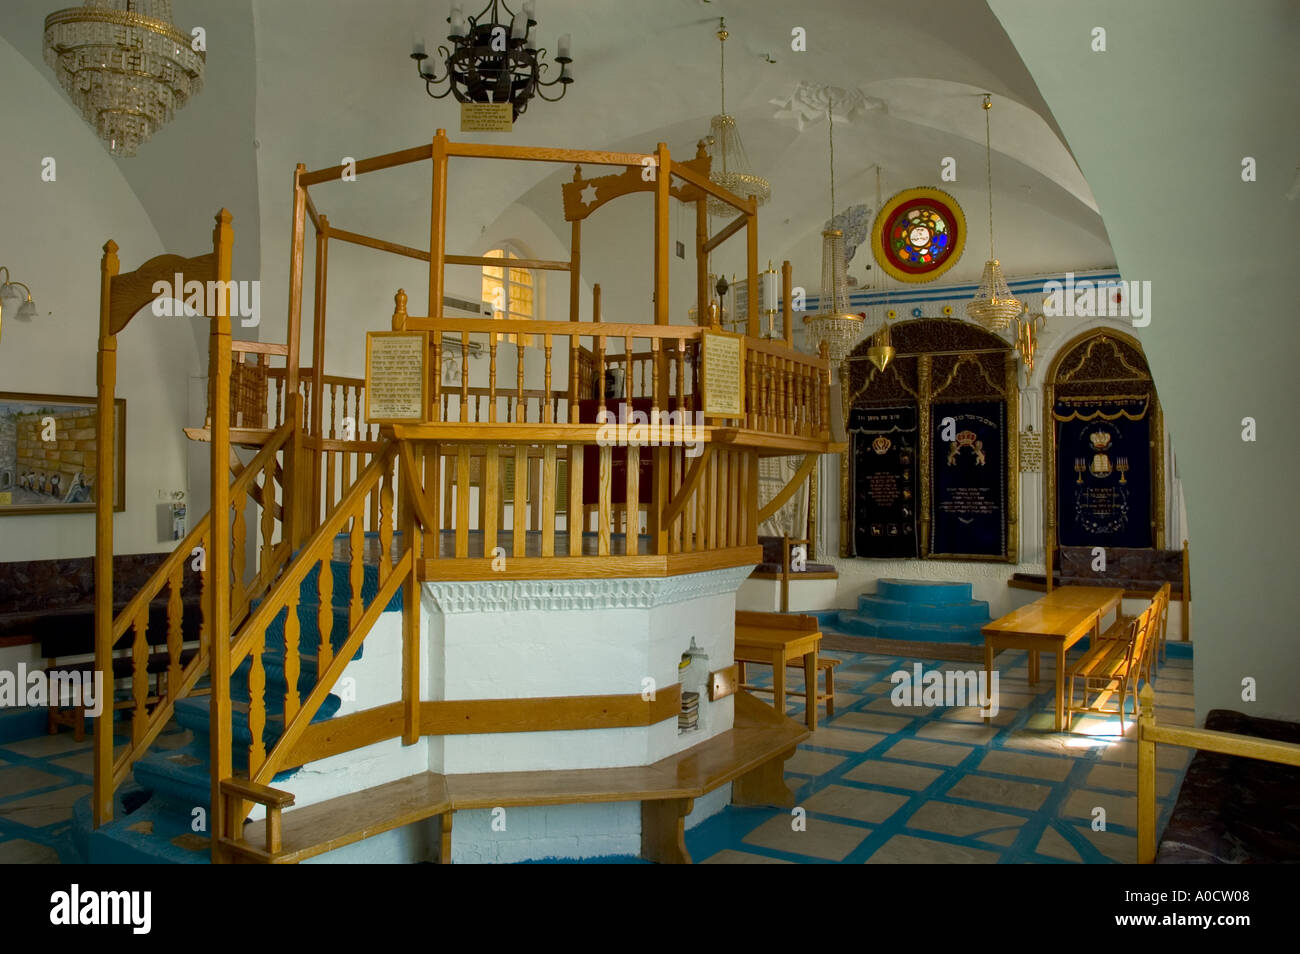 Israel Upper Galilee Safed Old City Haari Sepharadi Synagog interior view with entral stage Stock Photo